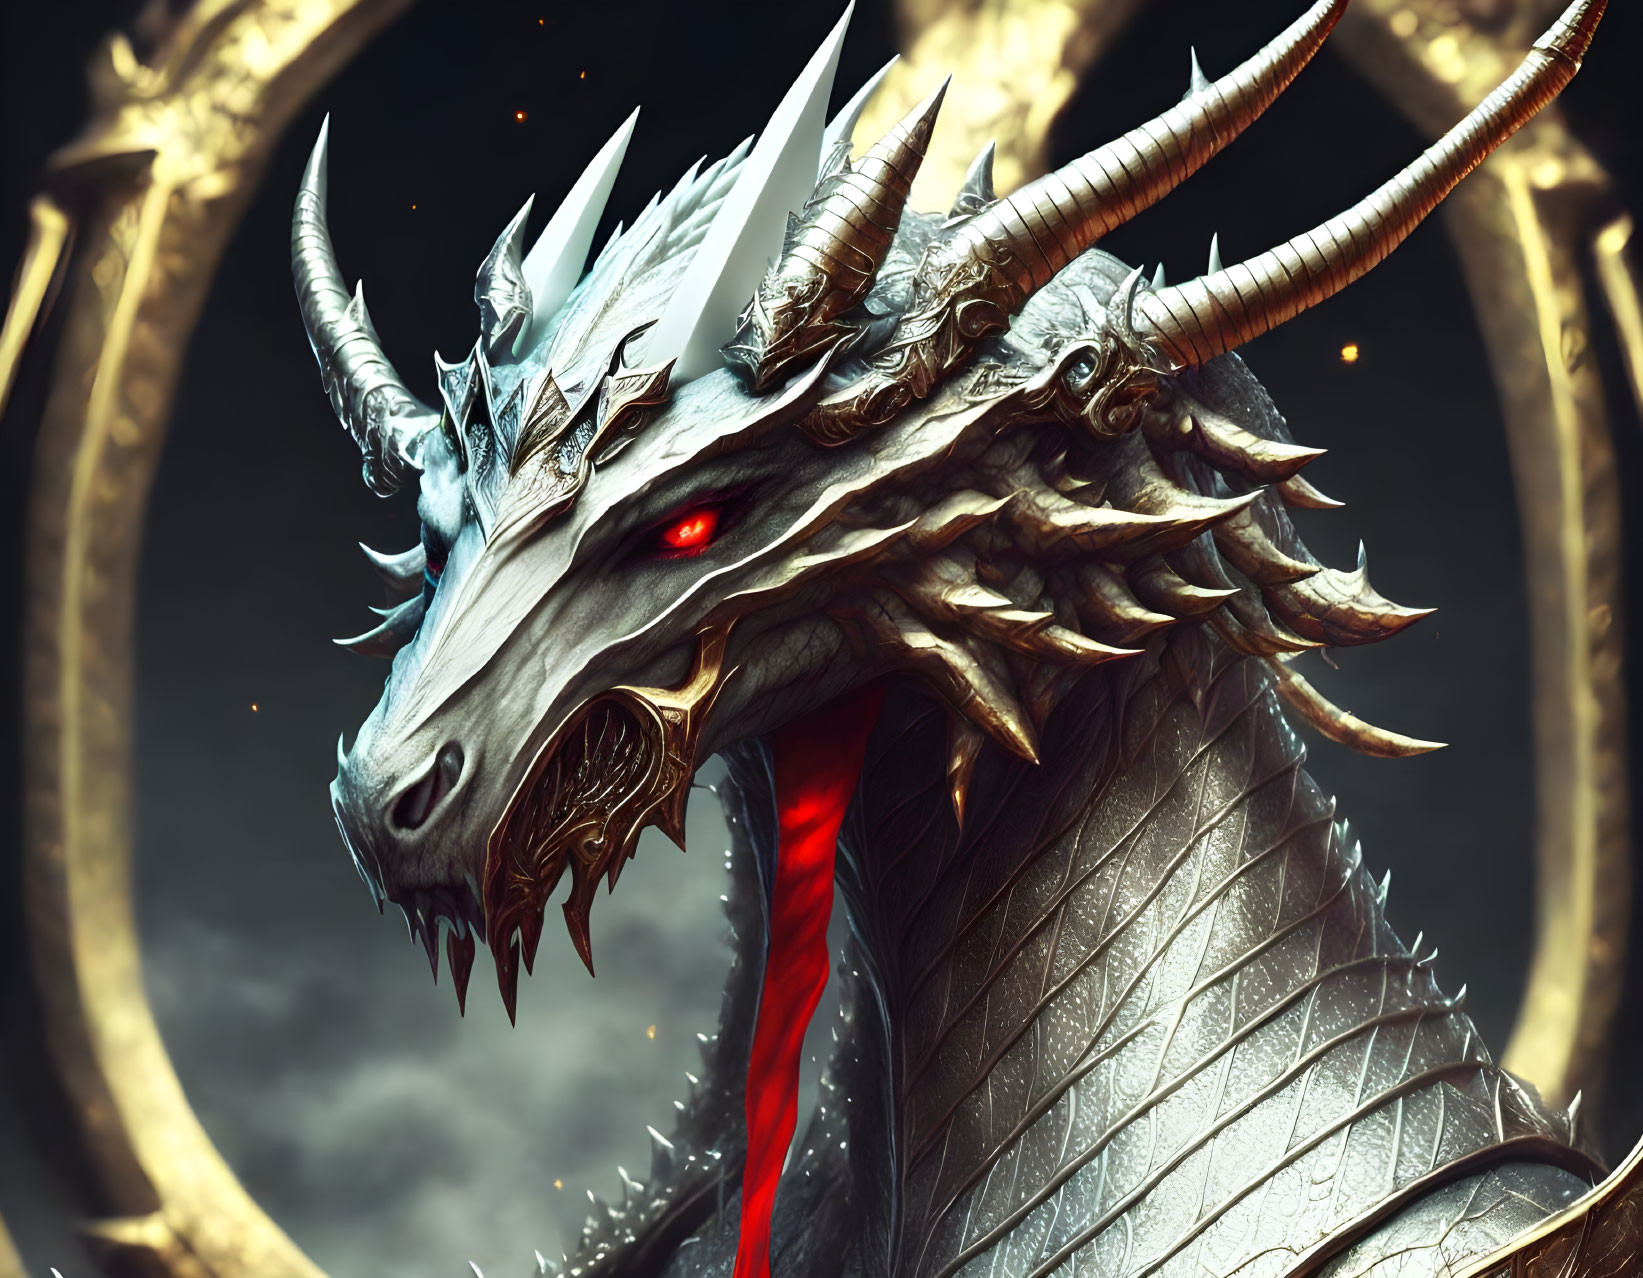 Silver-Blue Dragon with Red Eyes and Horns on Golden Circles